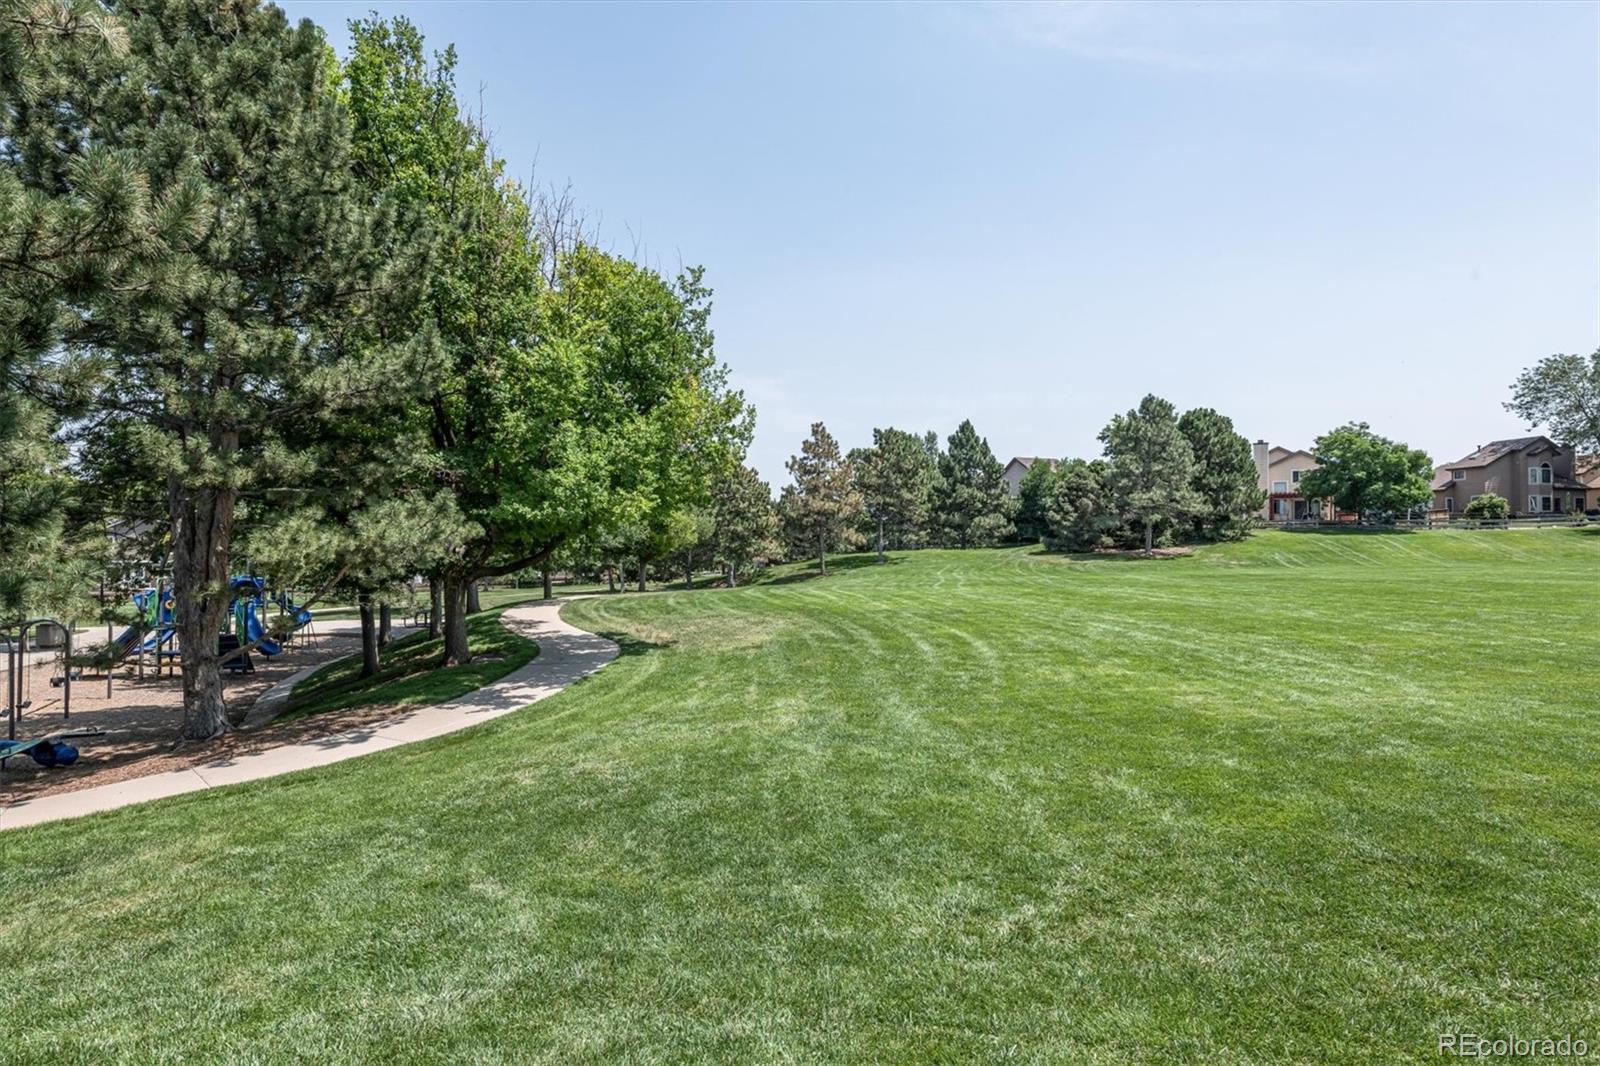 1445 Hermosa, Highlands Ranch, CO